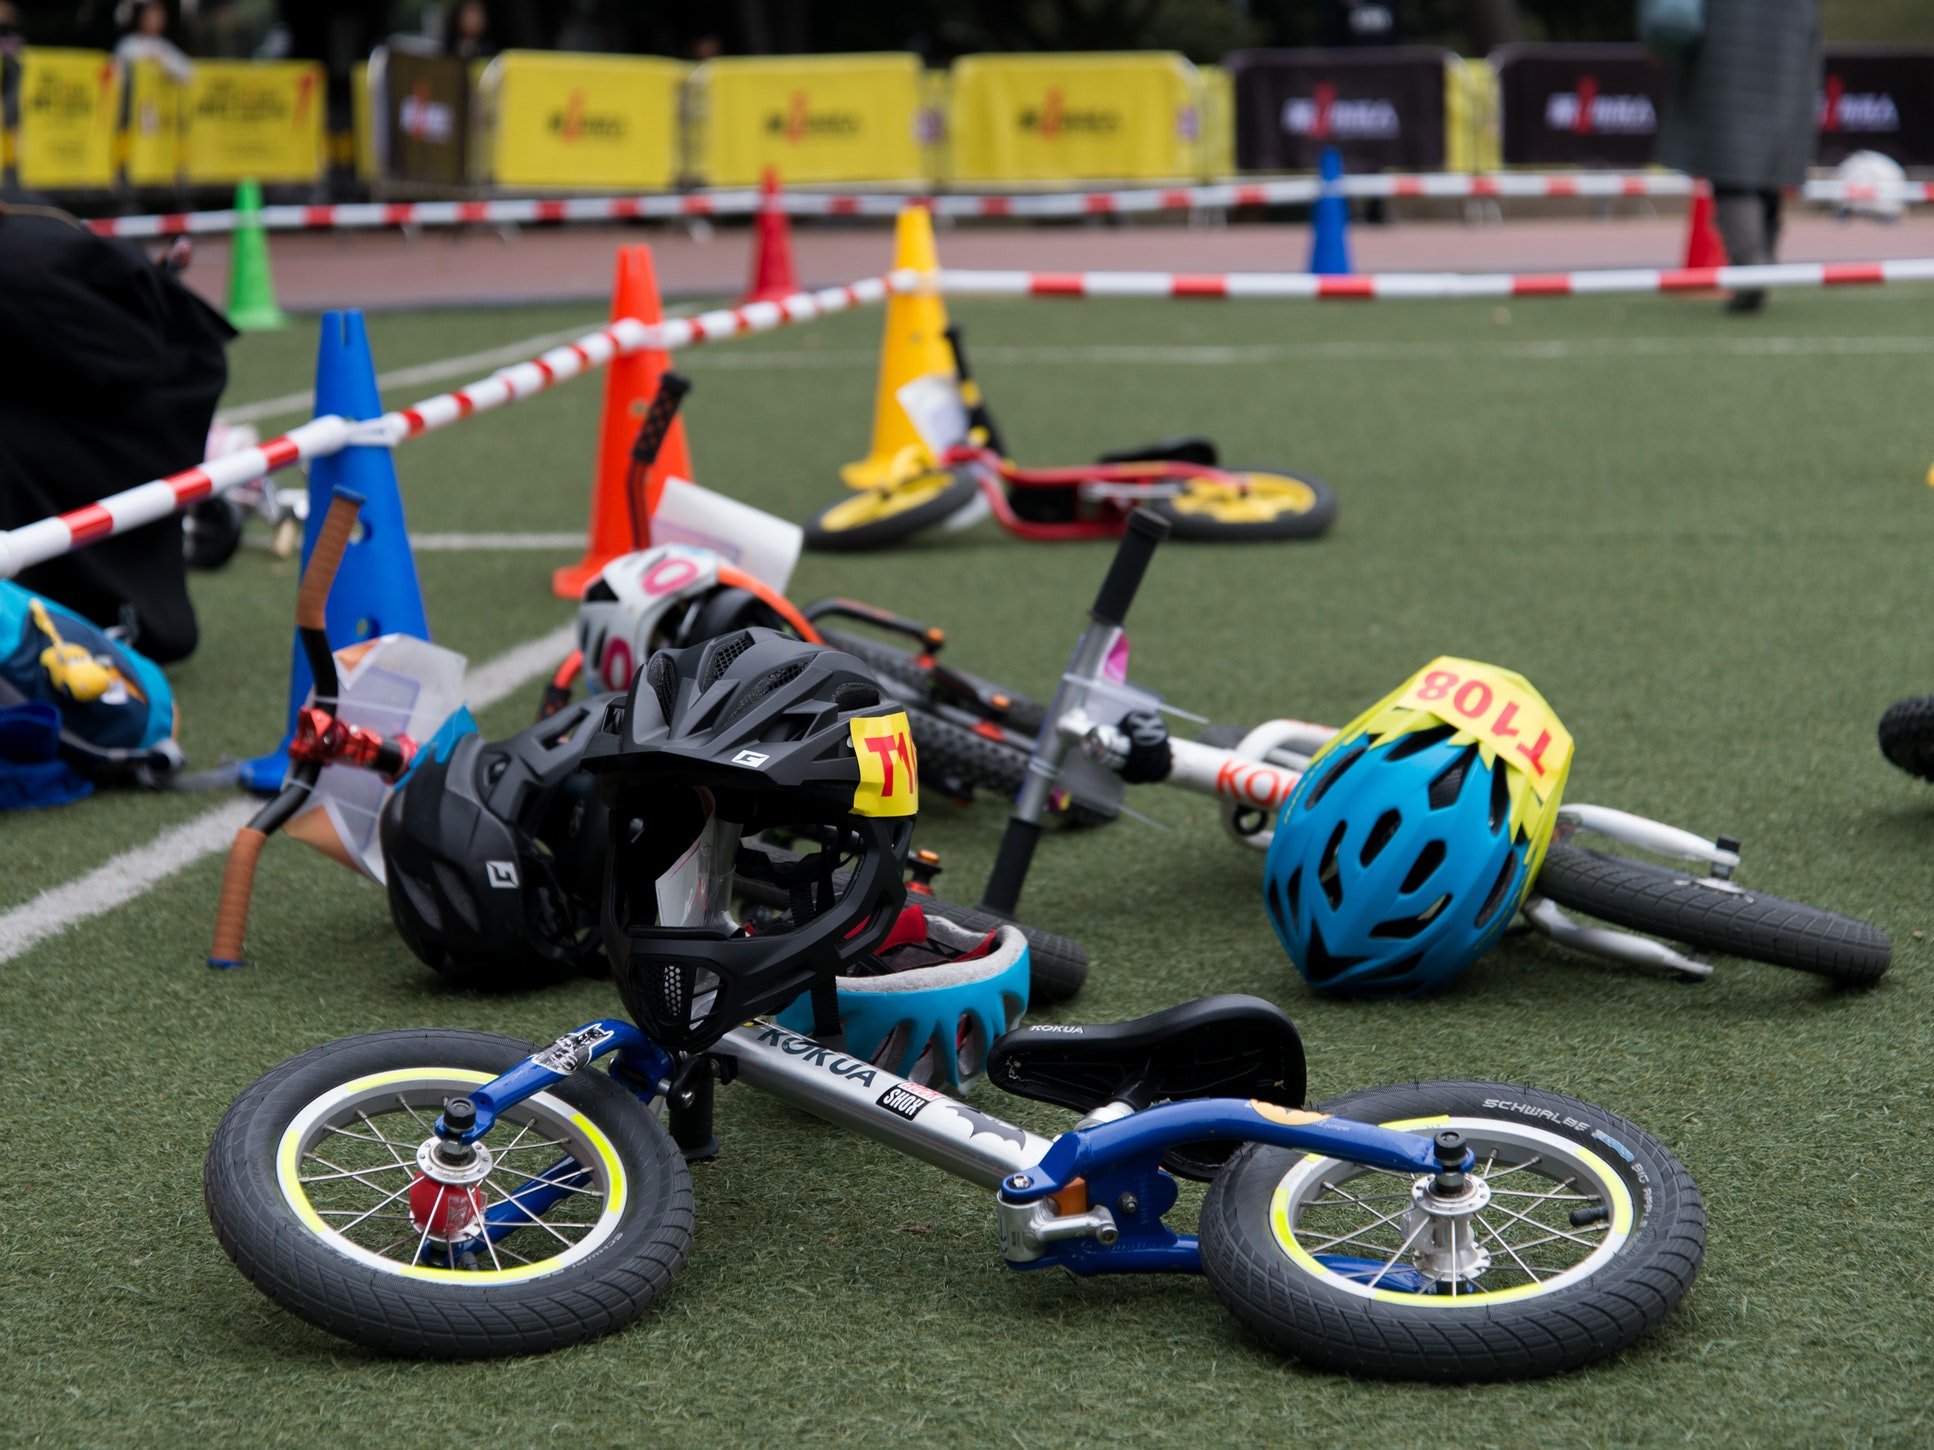 Planning to chose a Bicycle for your child? Did you know how to choose that awesome bike for children? Read must know 7 points here before you bring that prized yet safe possession. #cycling #bicycle #cycle #safetygears #gearcy #bicycleforkids #mustread